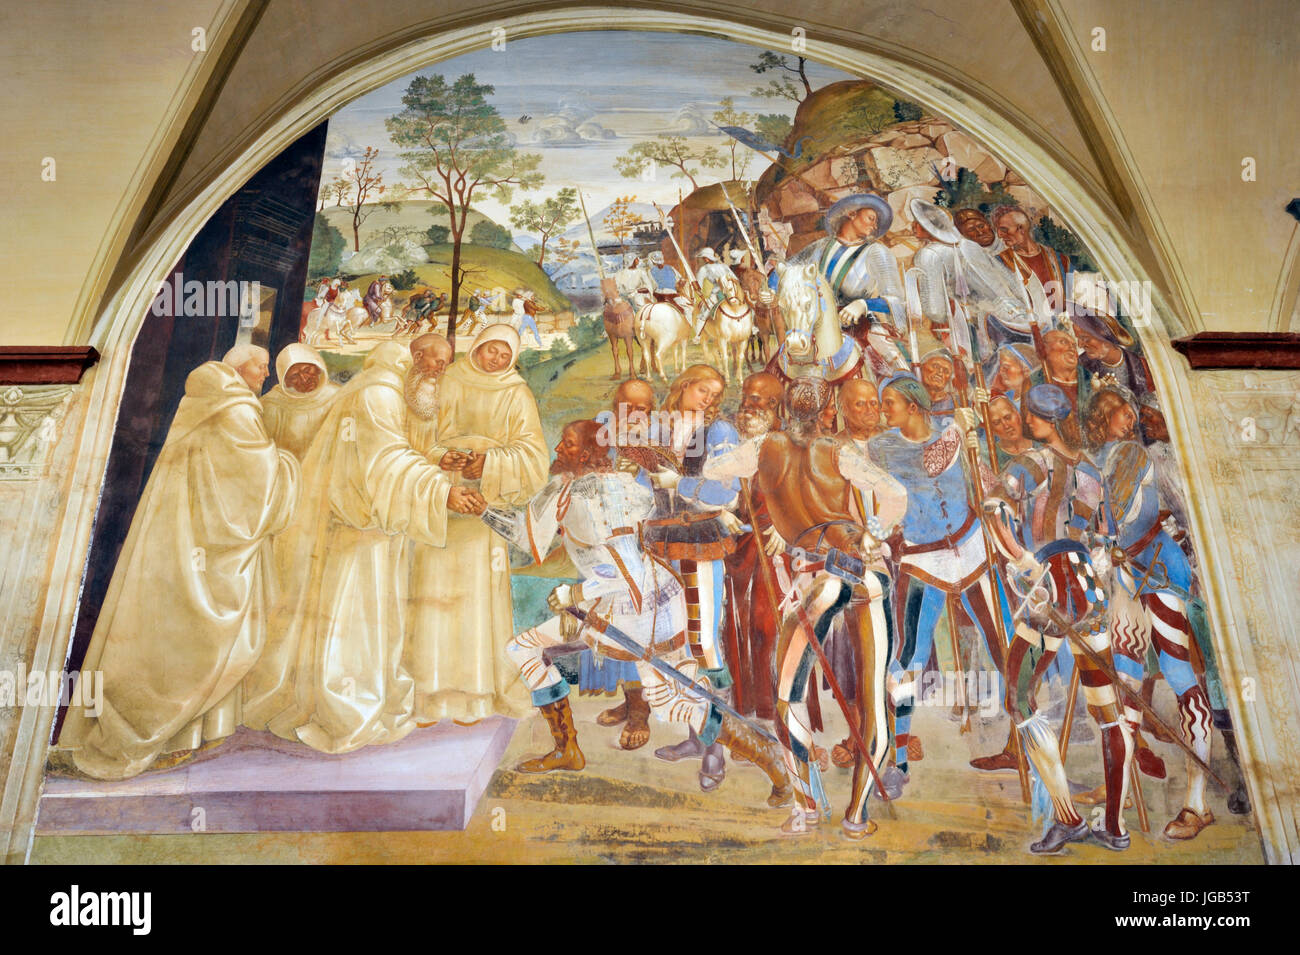 Renaissance frescos, st Benedict life, painting by Luca Signorelli, west side of Great Cloister, Abbey of Monte Oliveto Maggiore, Tuscany, Italy Stock Photo